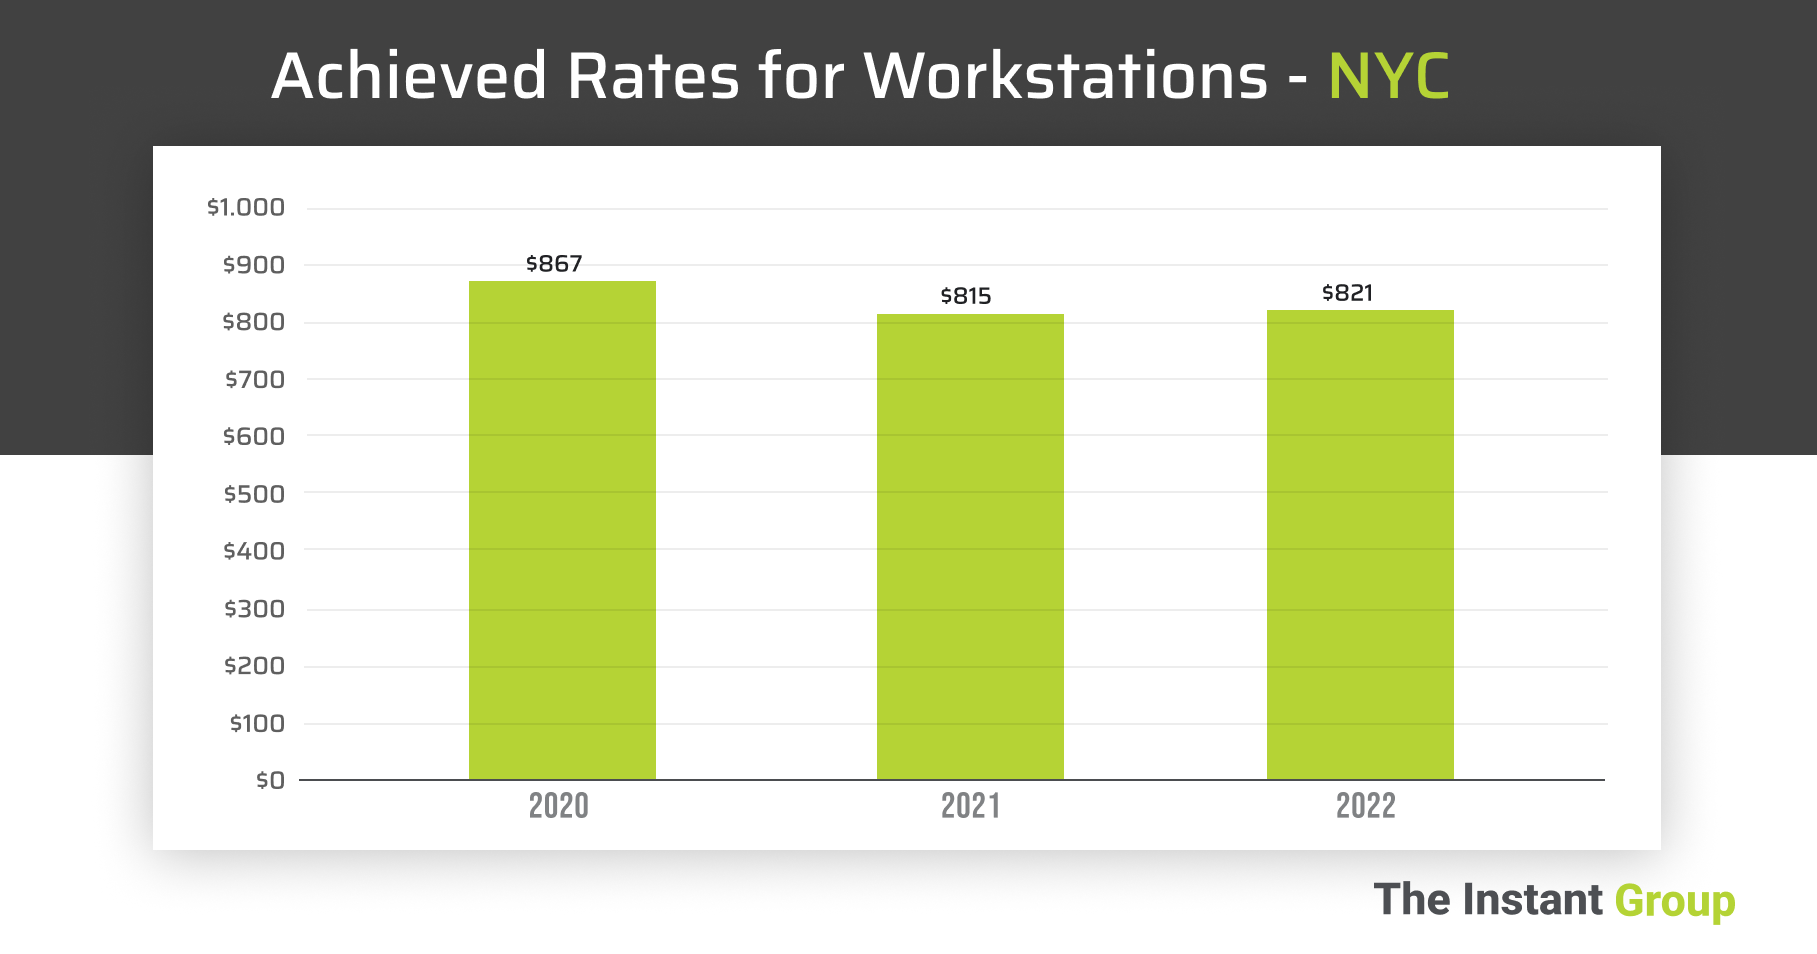 A graph showing the average workstation rates in New York City between 2020-2022.